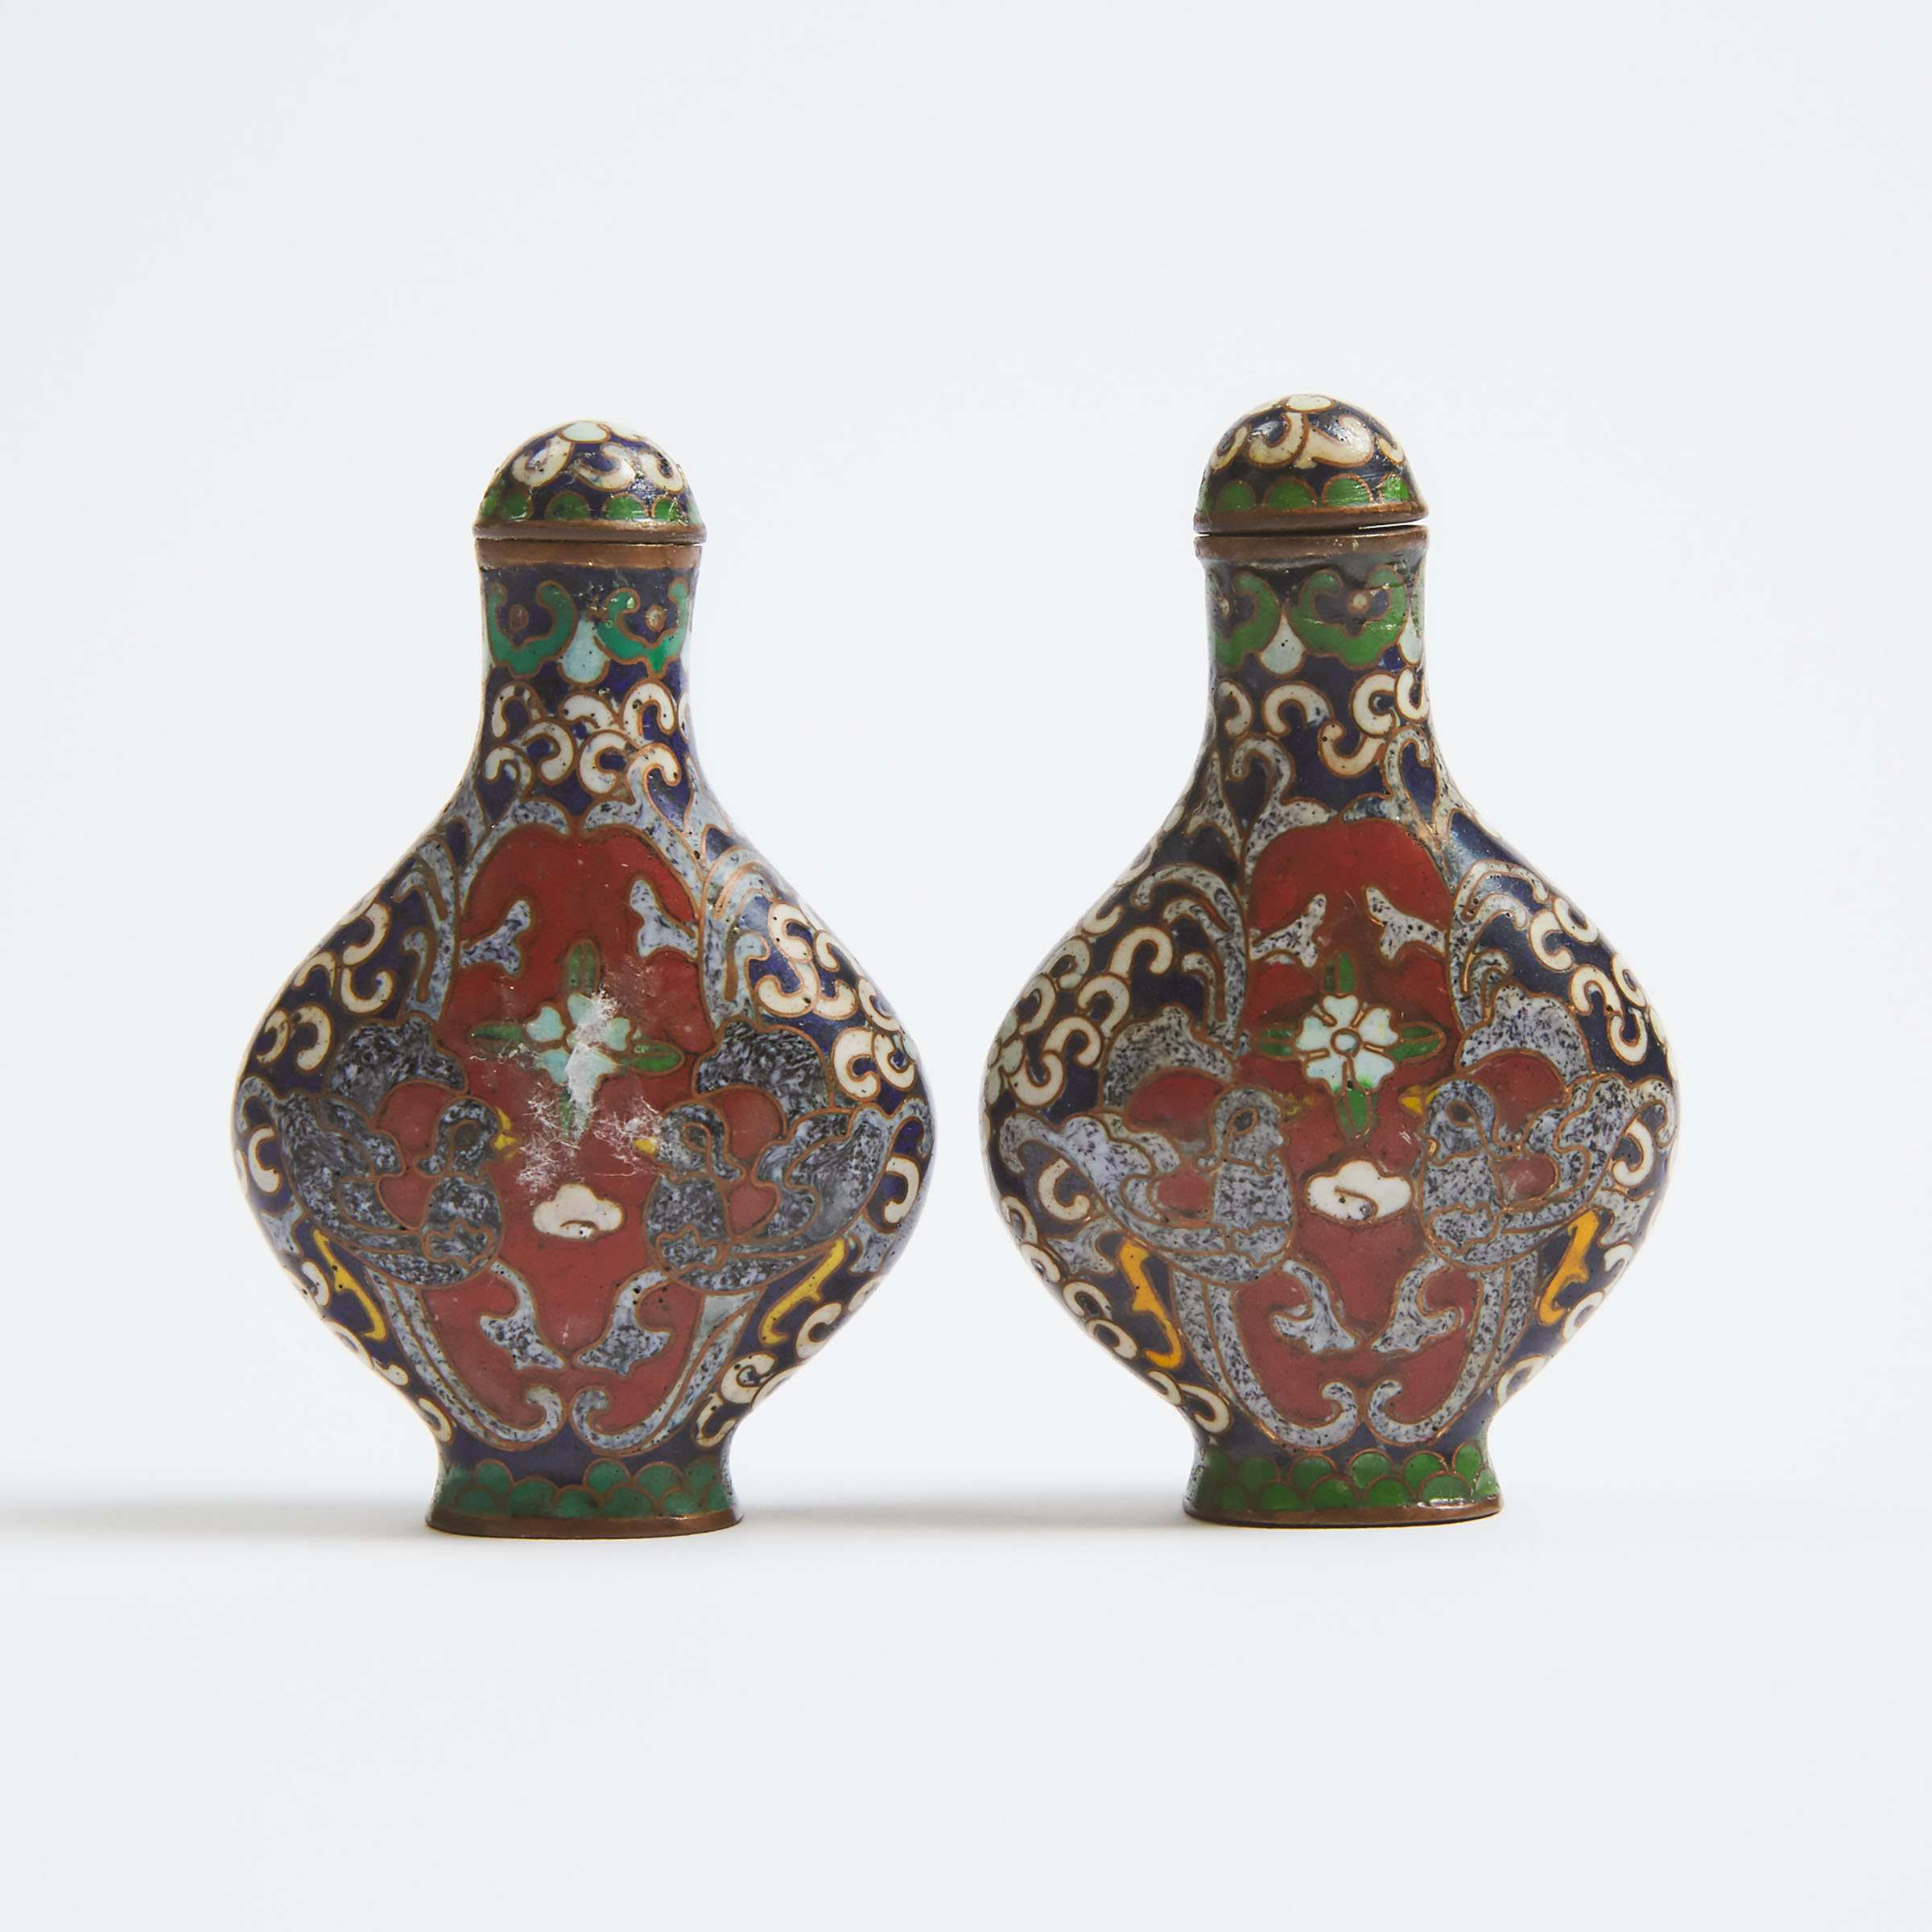 A Pair of Cloisonné Enamel Snuff Bottles, Republican Period, Early 20th Century